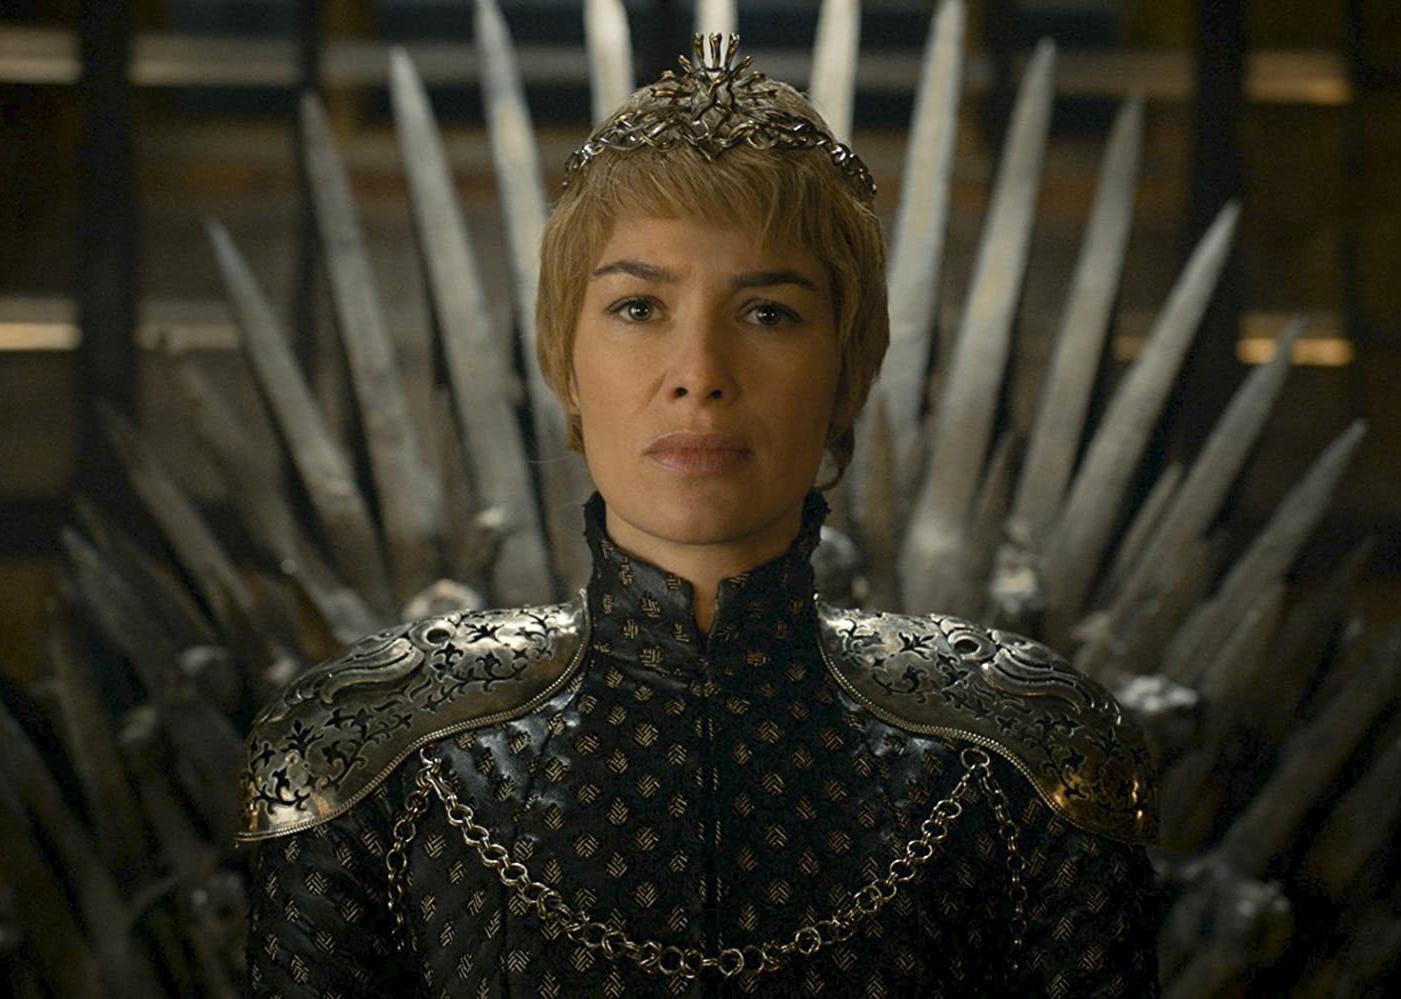 Lena Headey with short hair and a crown sitting on a throne.